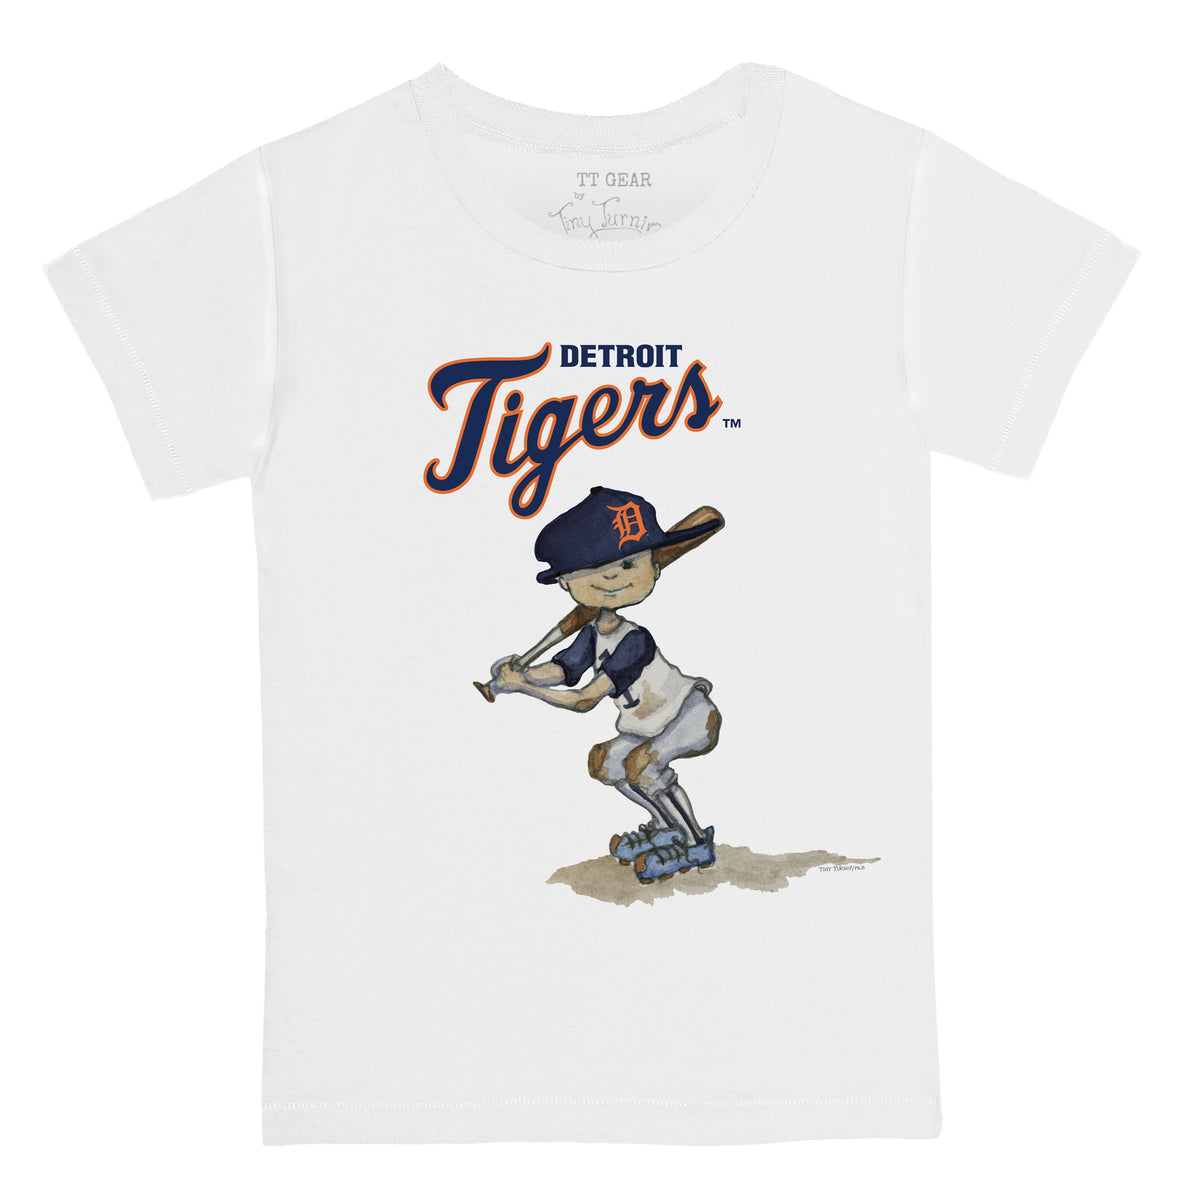 Official Kids Detroit Tigers Gear, Youth Tigers Apparel